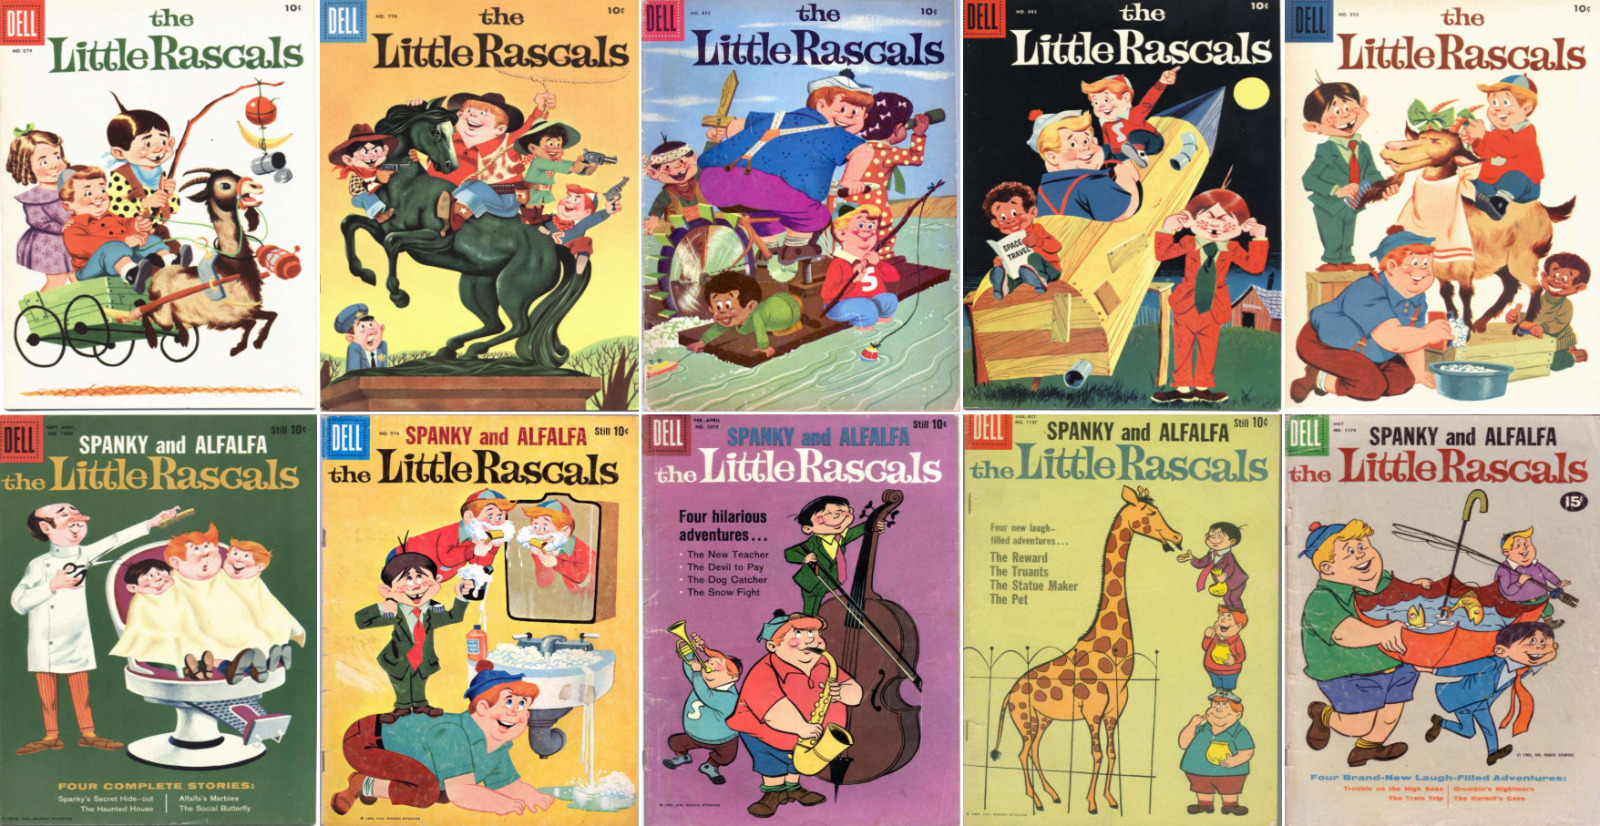 1956 - 1962 The Little Rascals Comic Book Package - 11 eBooks on CD